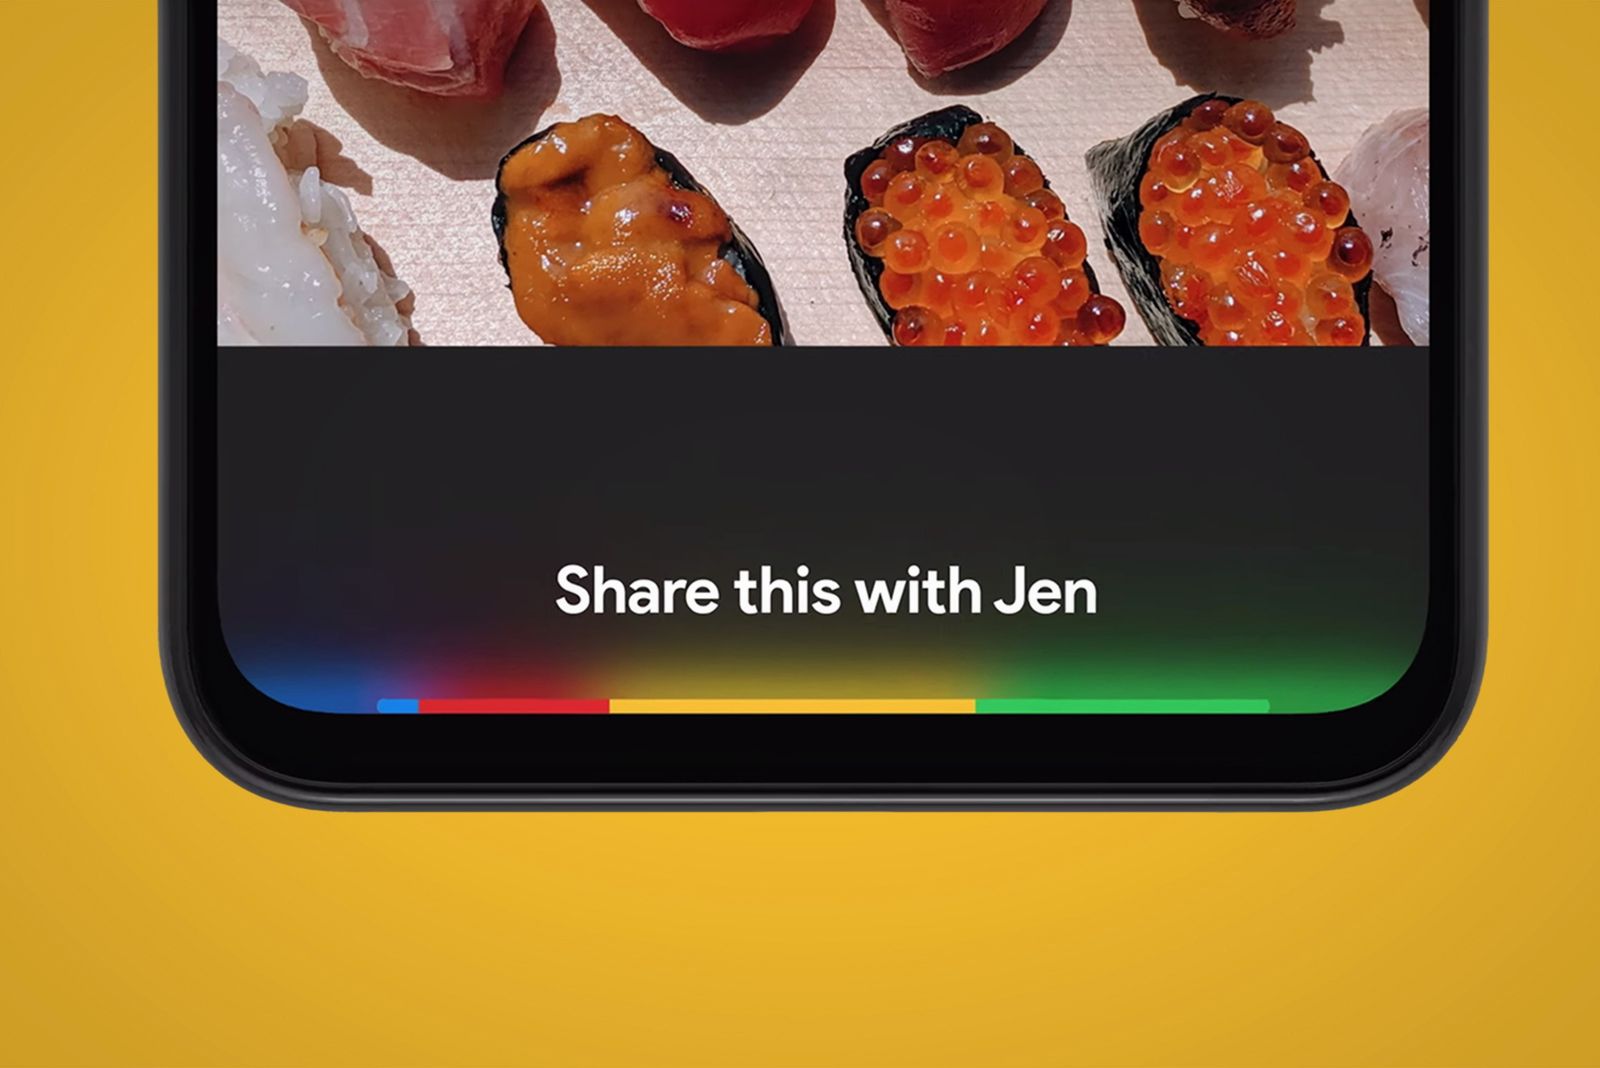 Pixel 4 users can now use Google Assistant voice commands to control their apps image 1